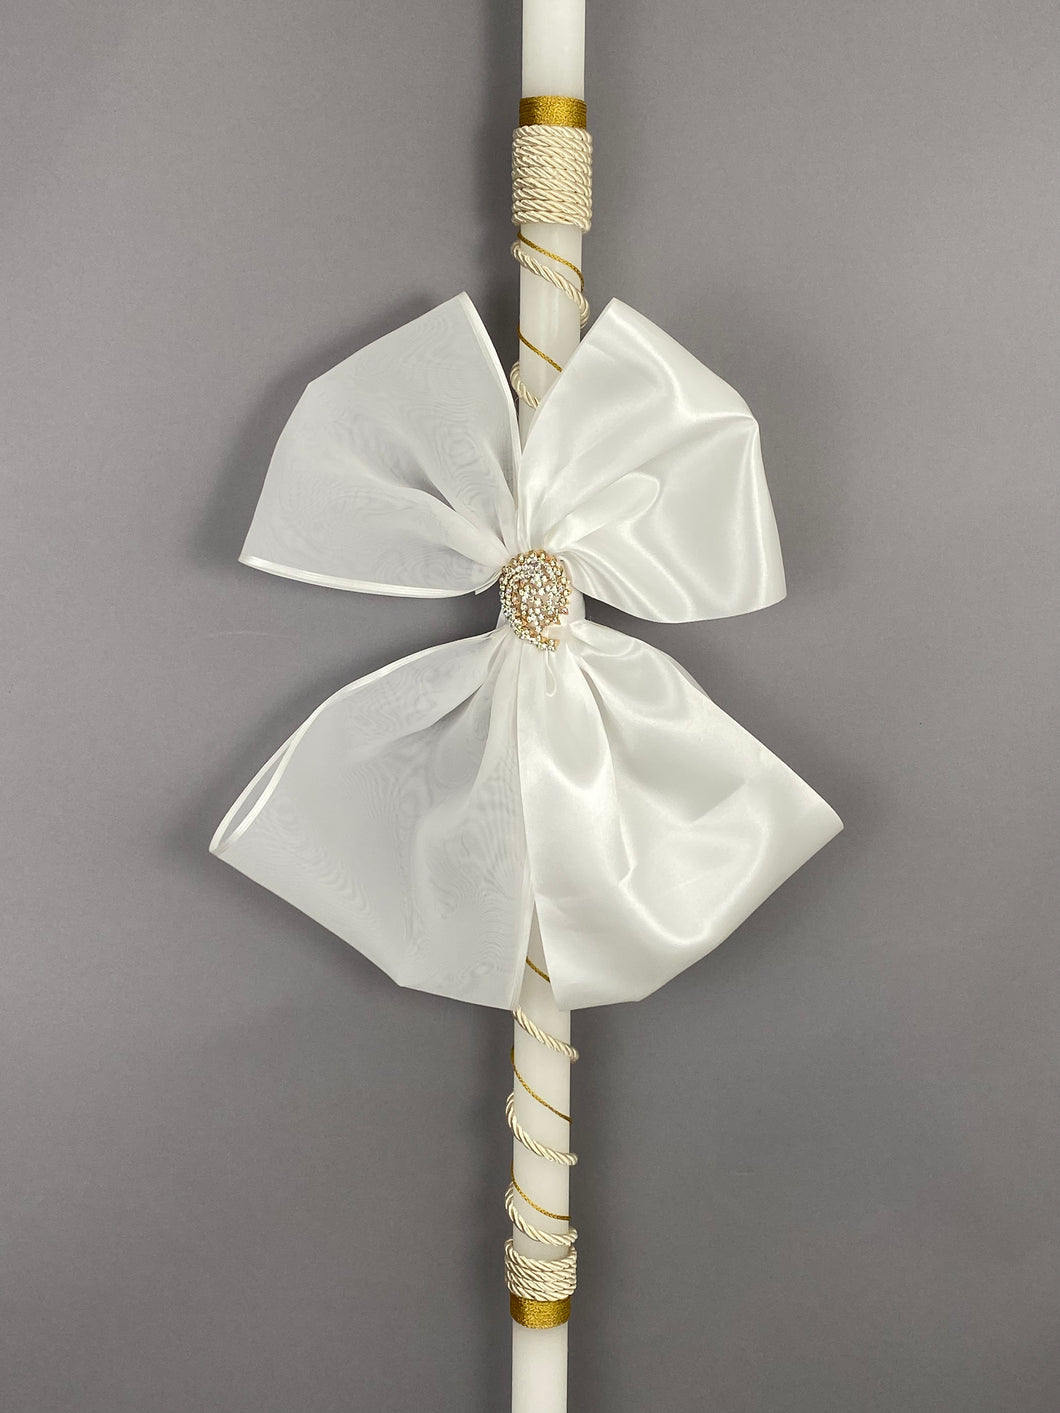 2 Decorated 4 Foot Wedding Candles with Cord, Gold  Wire and Broach W70137